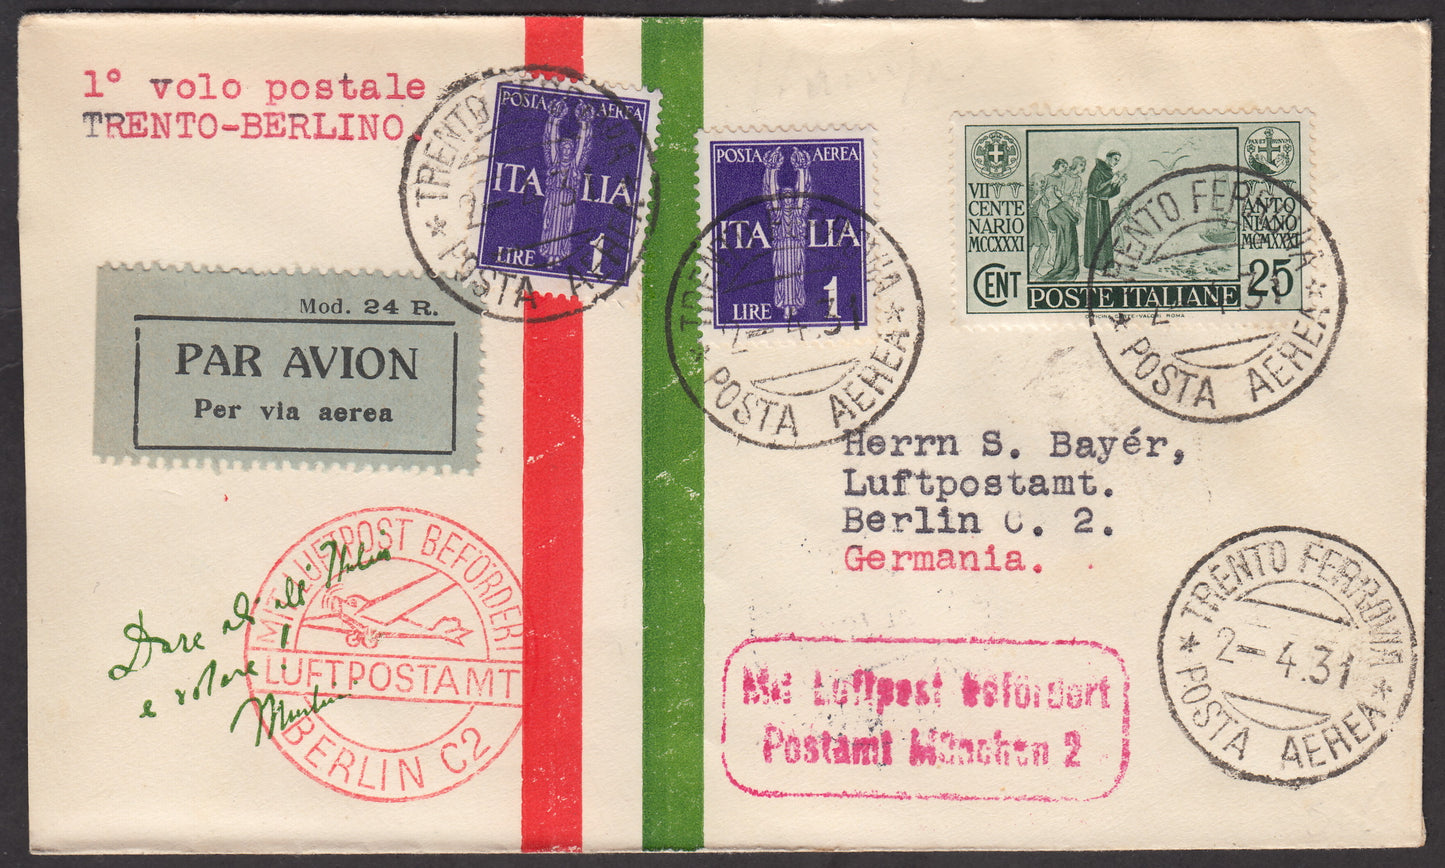 1931 - First flight Trento - Berlin 2/4/31 stamped with S. Antonio c. 25 green + PAL 1 violet two copies (293 + A14) 